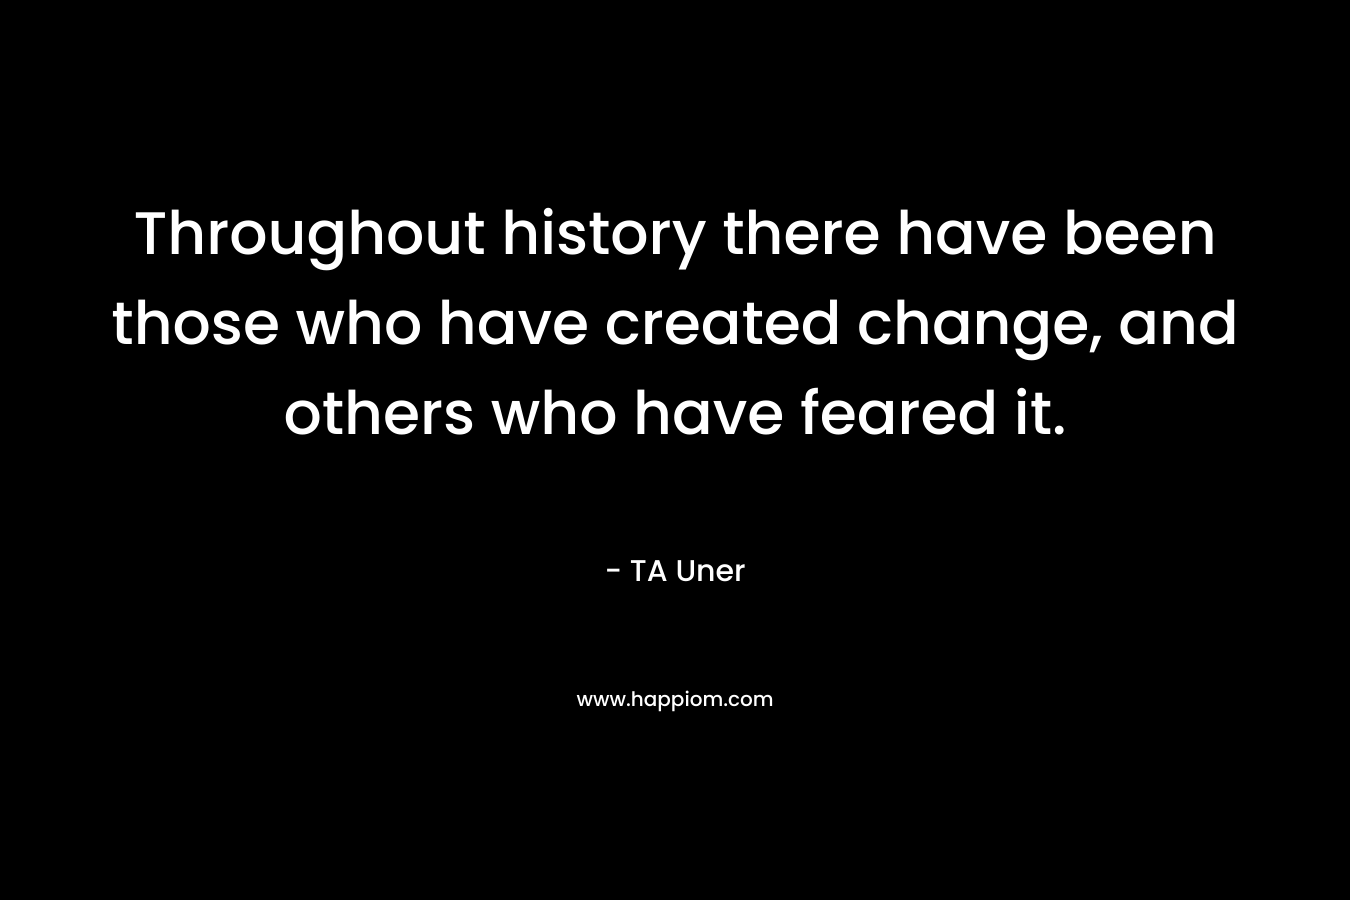 Throughout history there have been those who have created change, and others who have feared it.